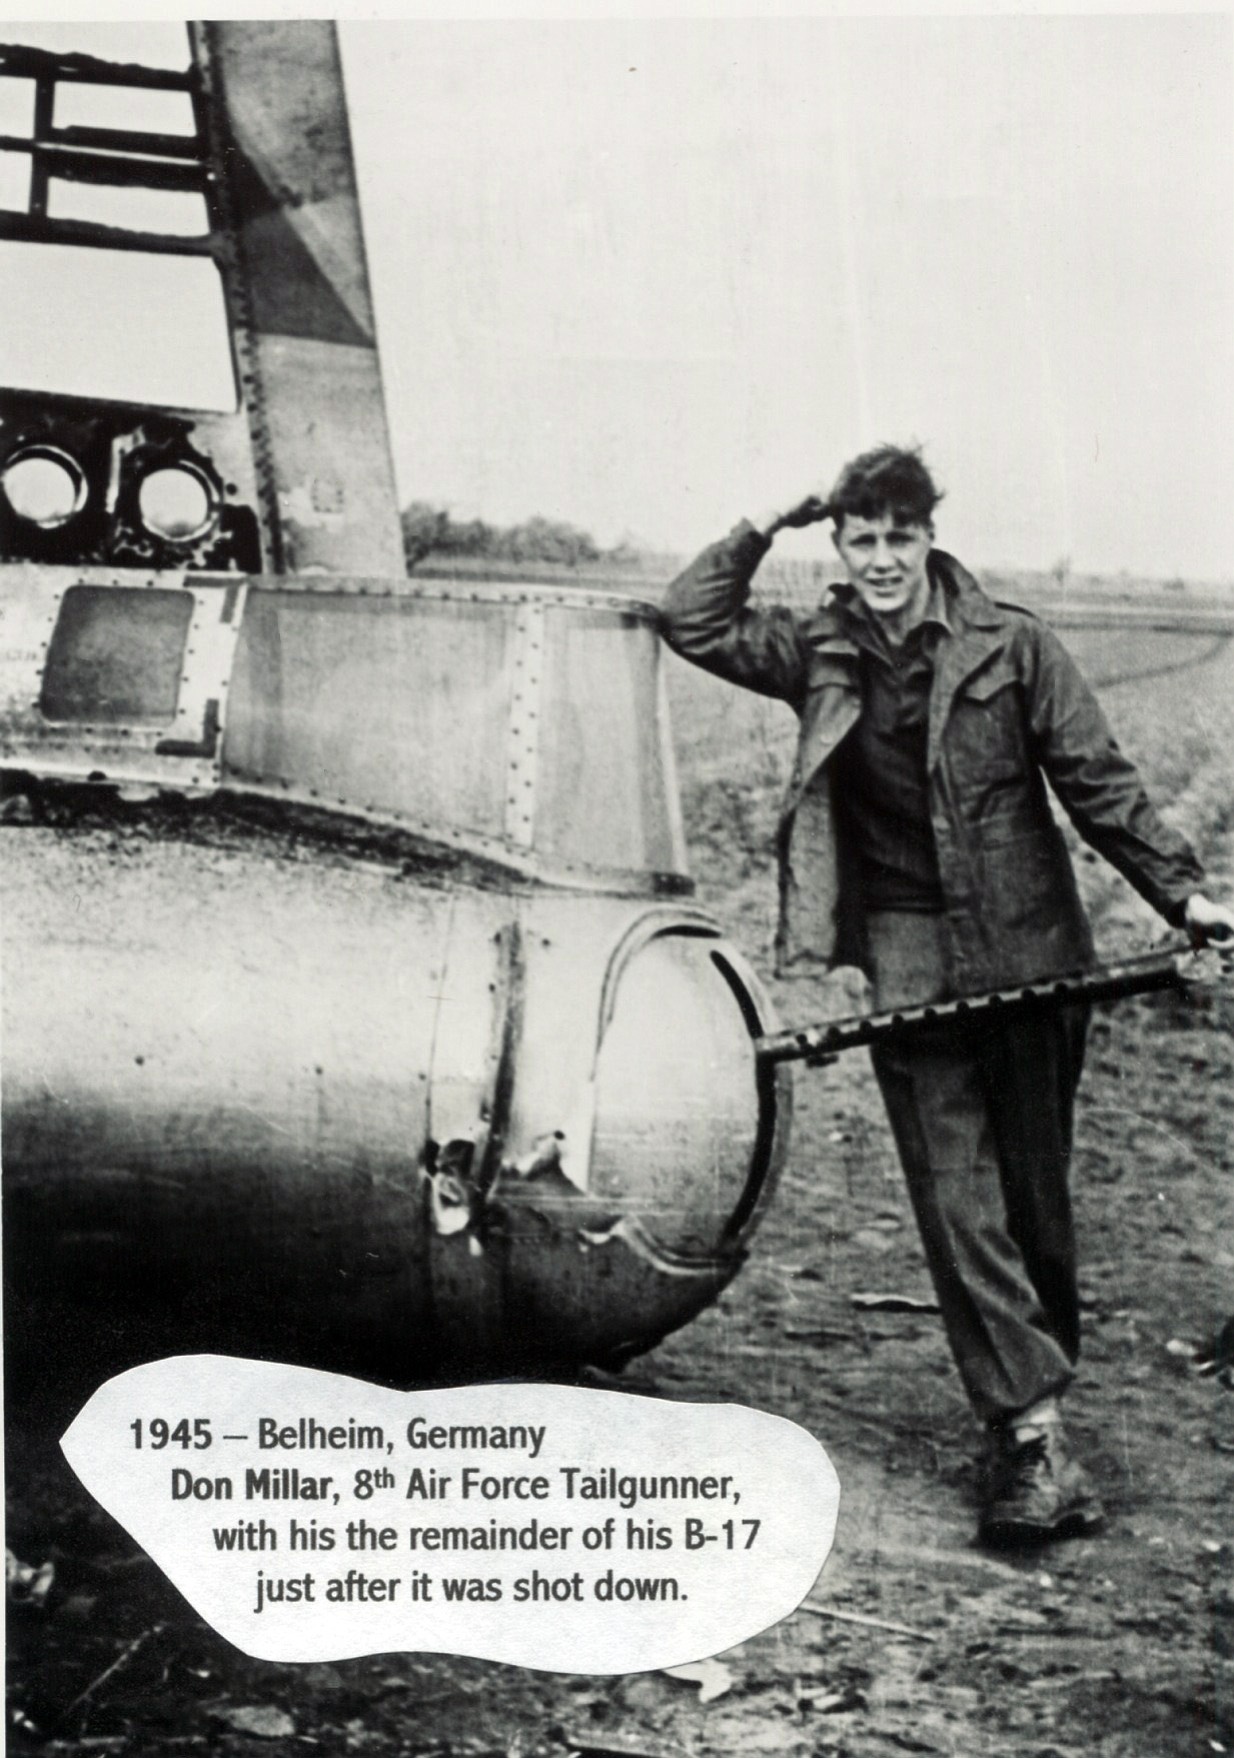 Don Millar next to his B-17 tail-gun position the day after the &quot;Screwball Express&quot; was shot down in Germany on April 5, 1945.